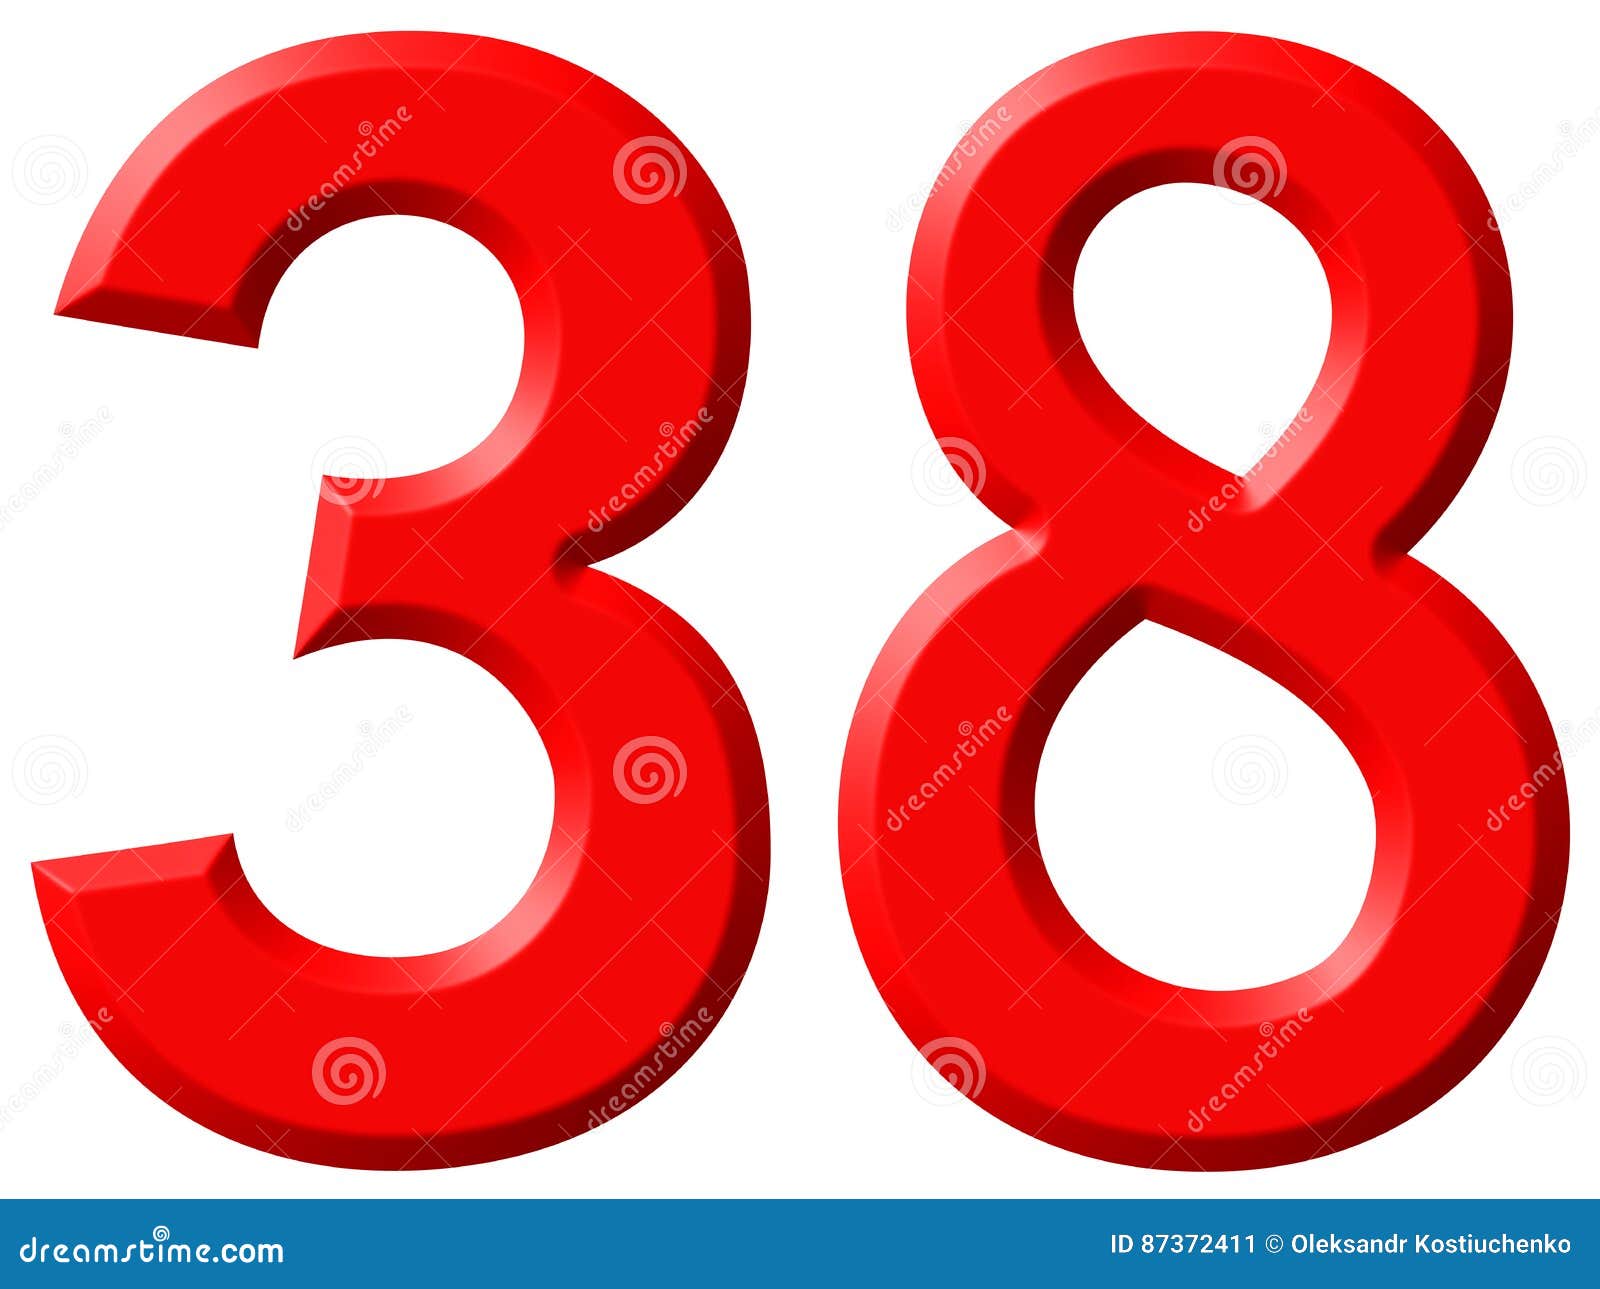 Numeral 38, Thirty Eight, Isolated on White Background, 3d Stock